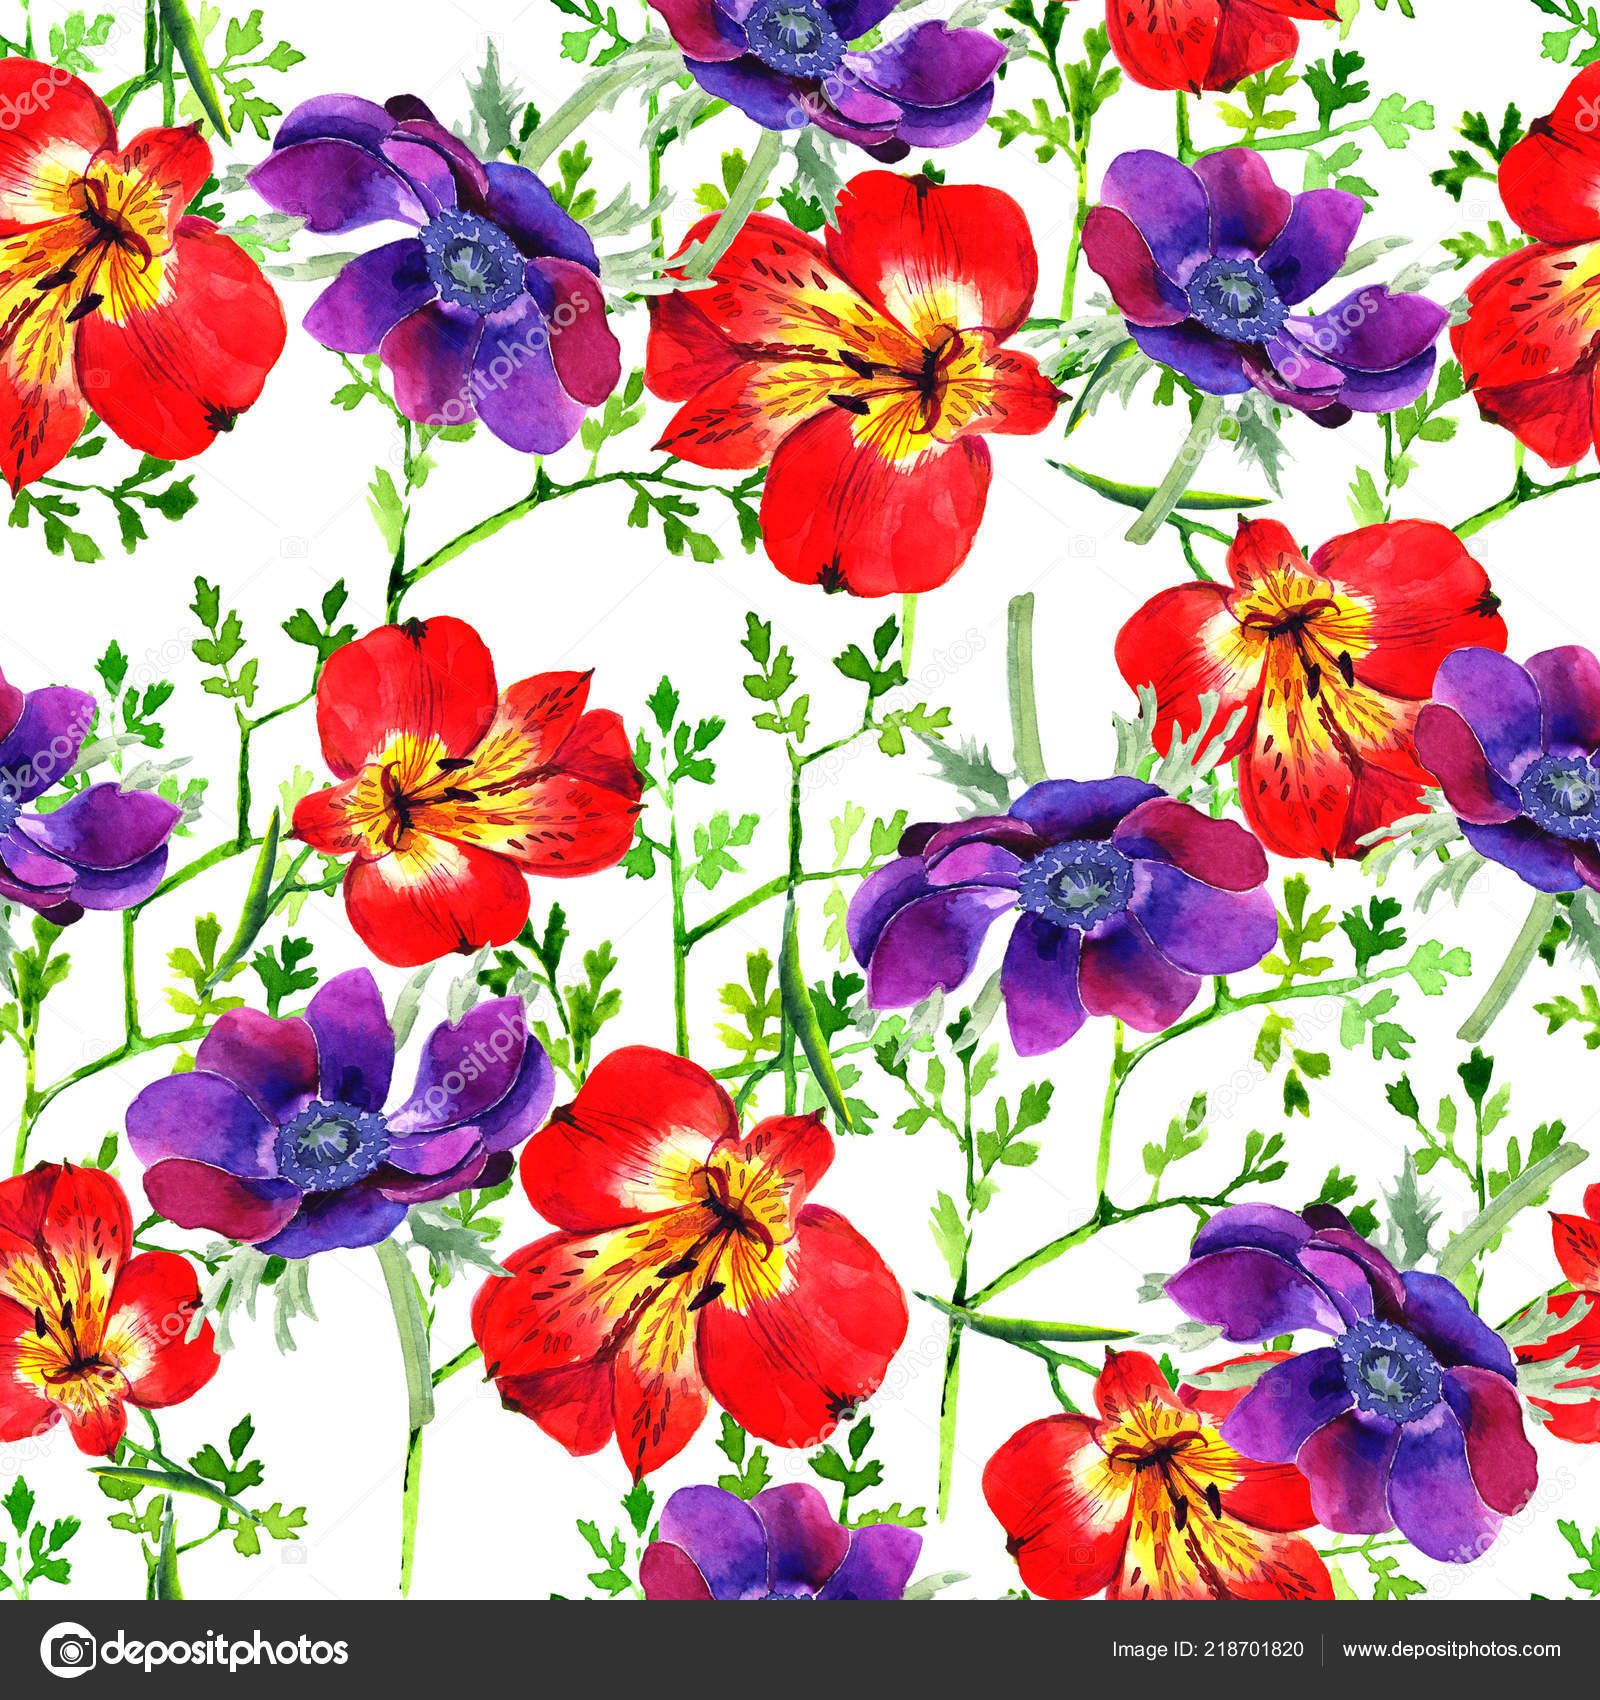 Seamless Floral Background With Bouquets Of Flowers - Pansy , HD Wallpaper & Backgrounds